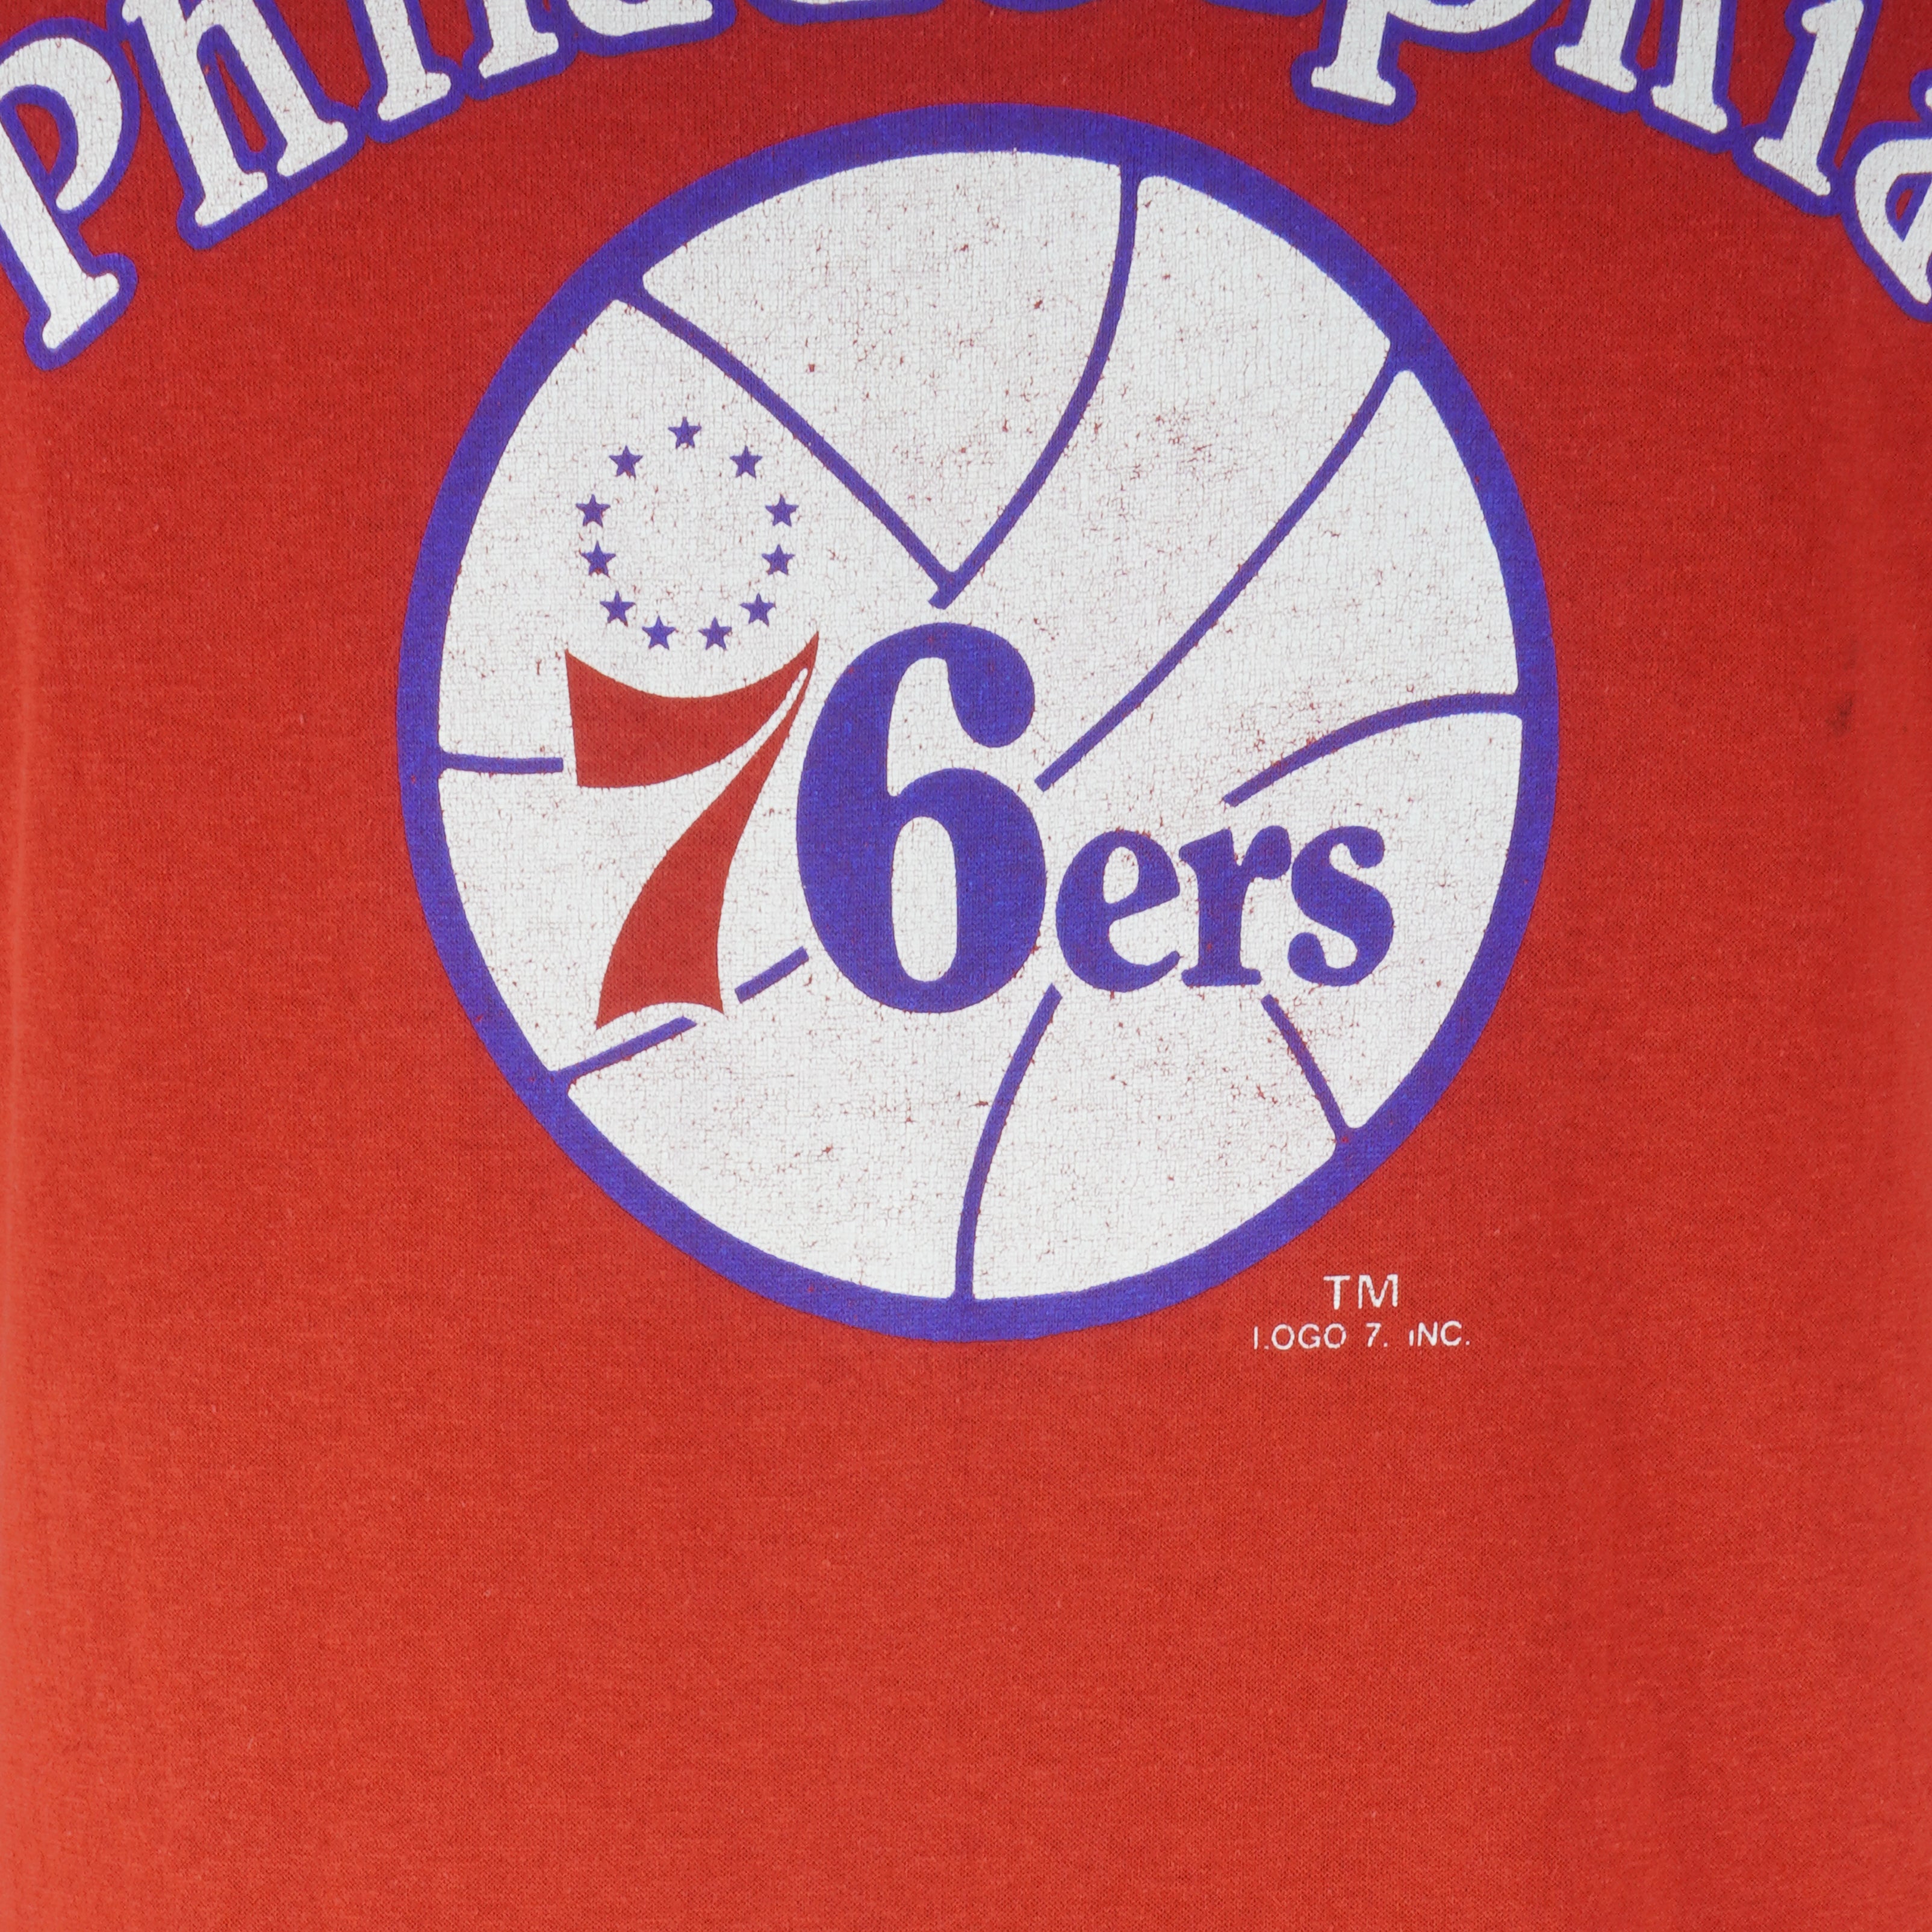 Philadelphia 76ers Vintage Clothing, 76ers Collection, 76ers